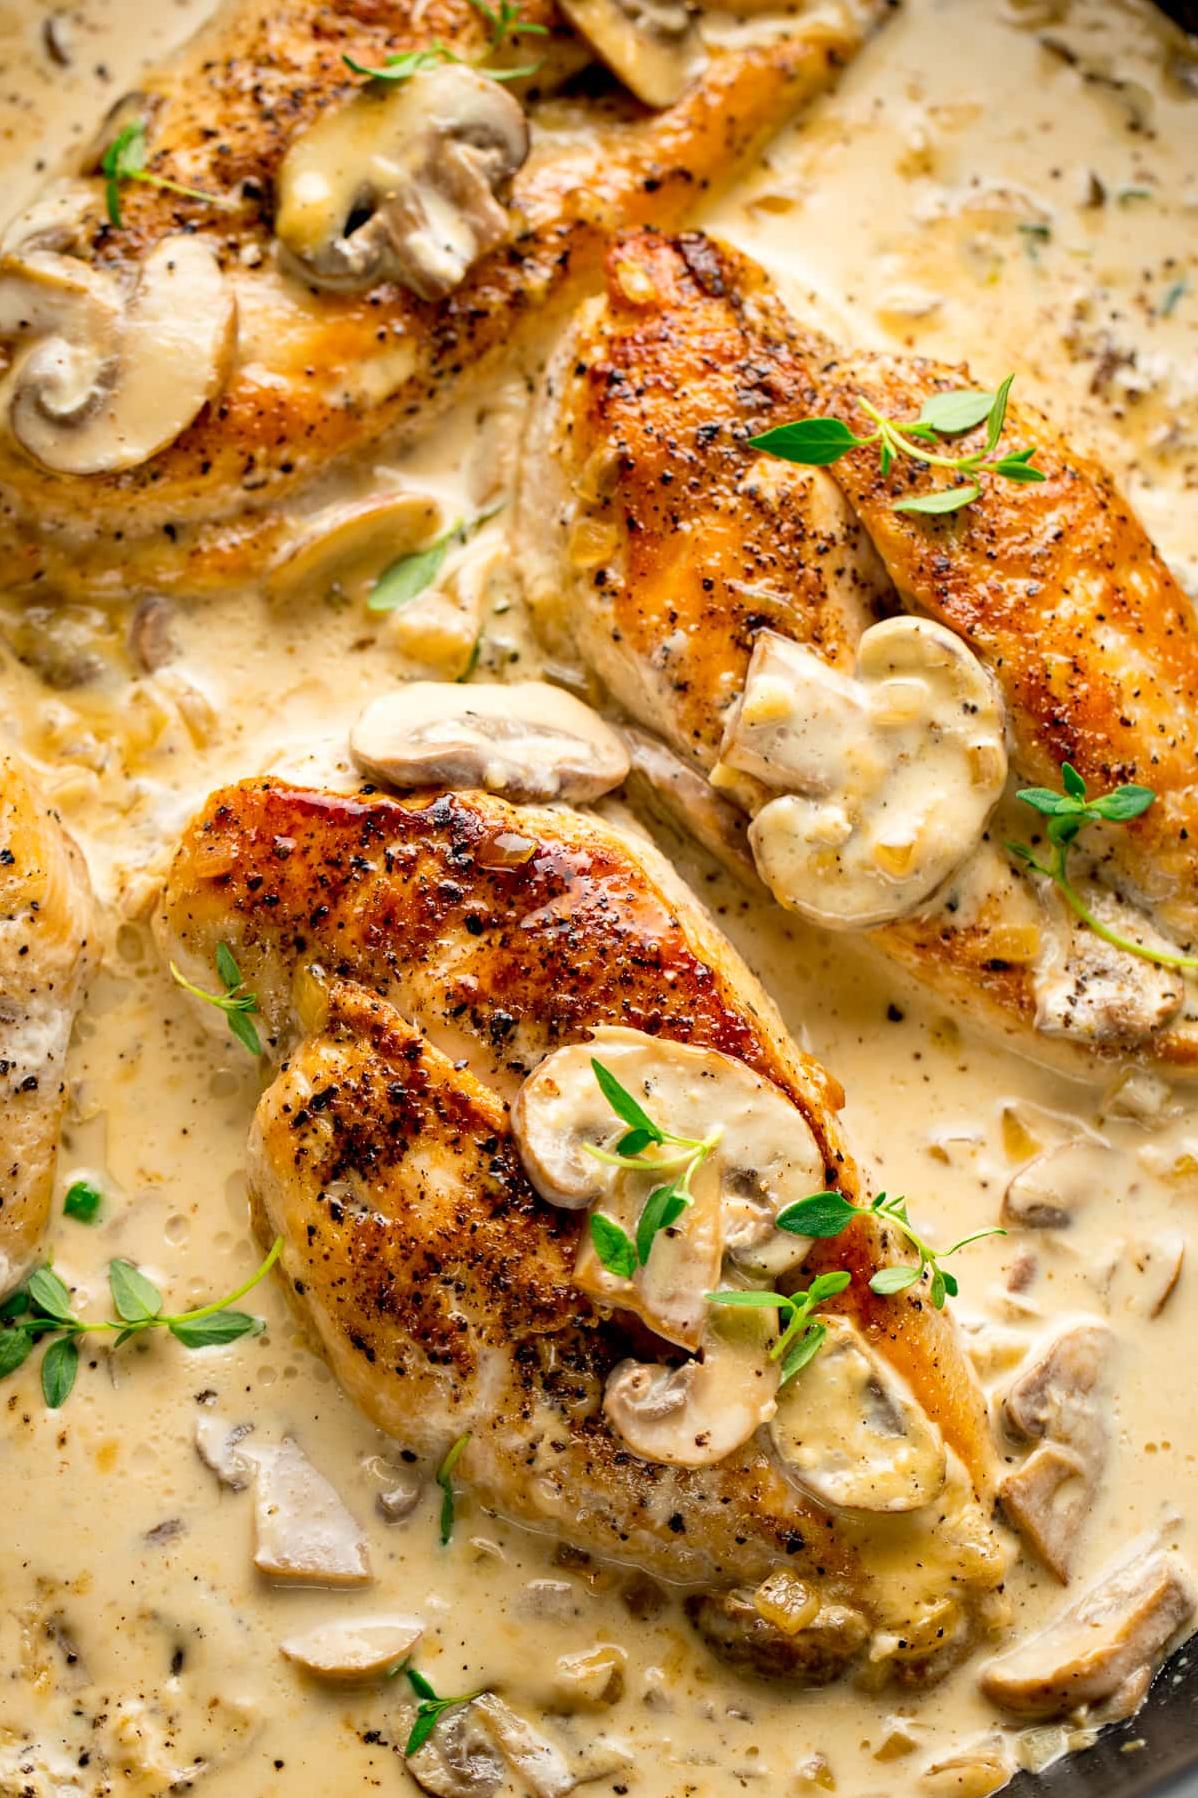  Elevate your weeknight dinner with this impressive white wine and mushroom chicken recipe